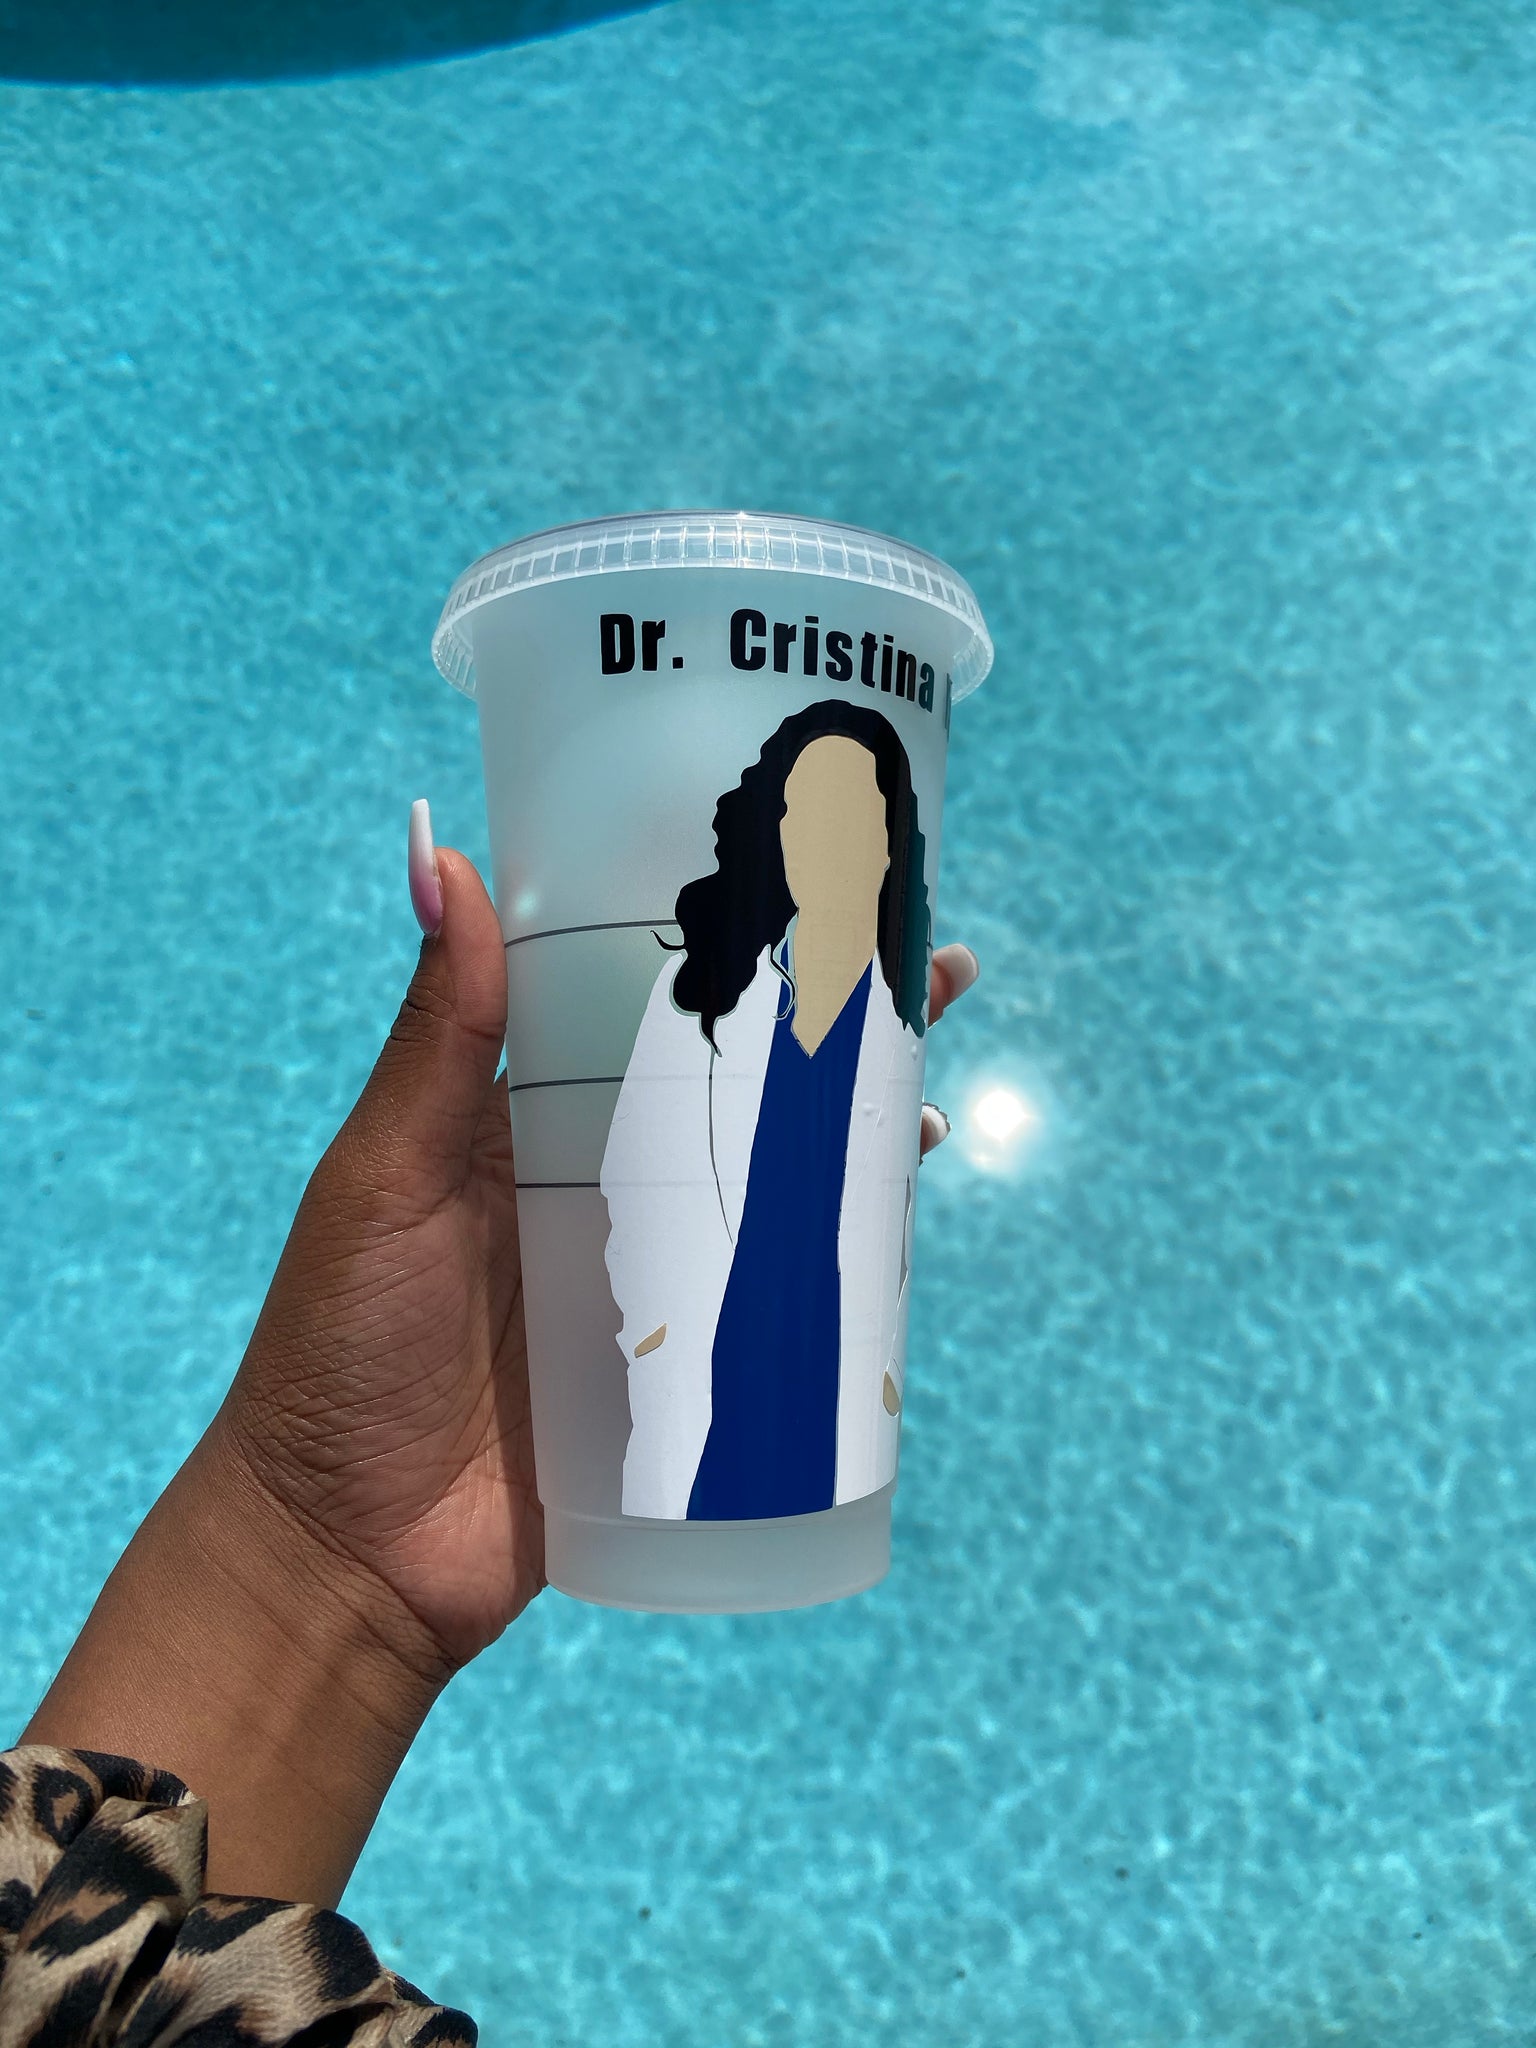 Cristina Yang: Grey’s Anatomy Inspired Cold Cup - HPK Personalized Products and more